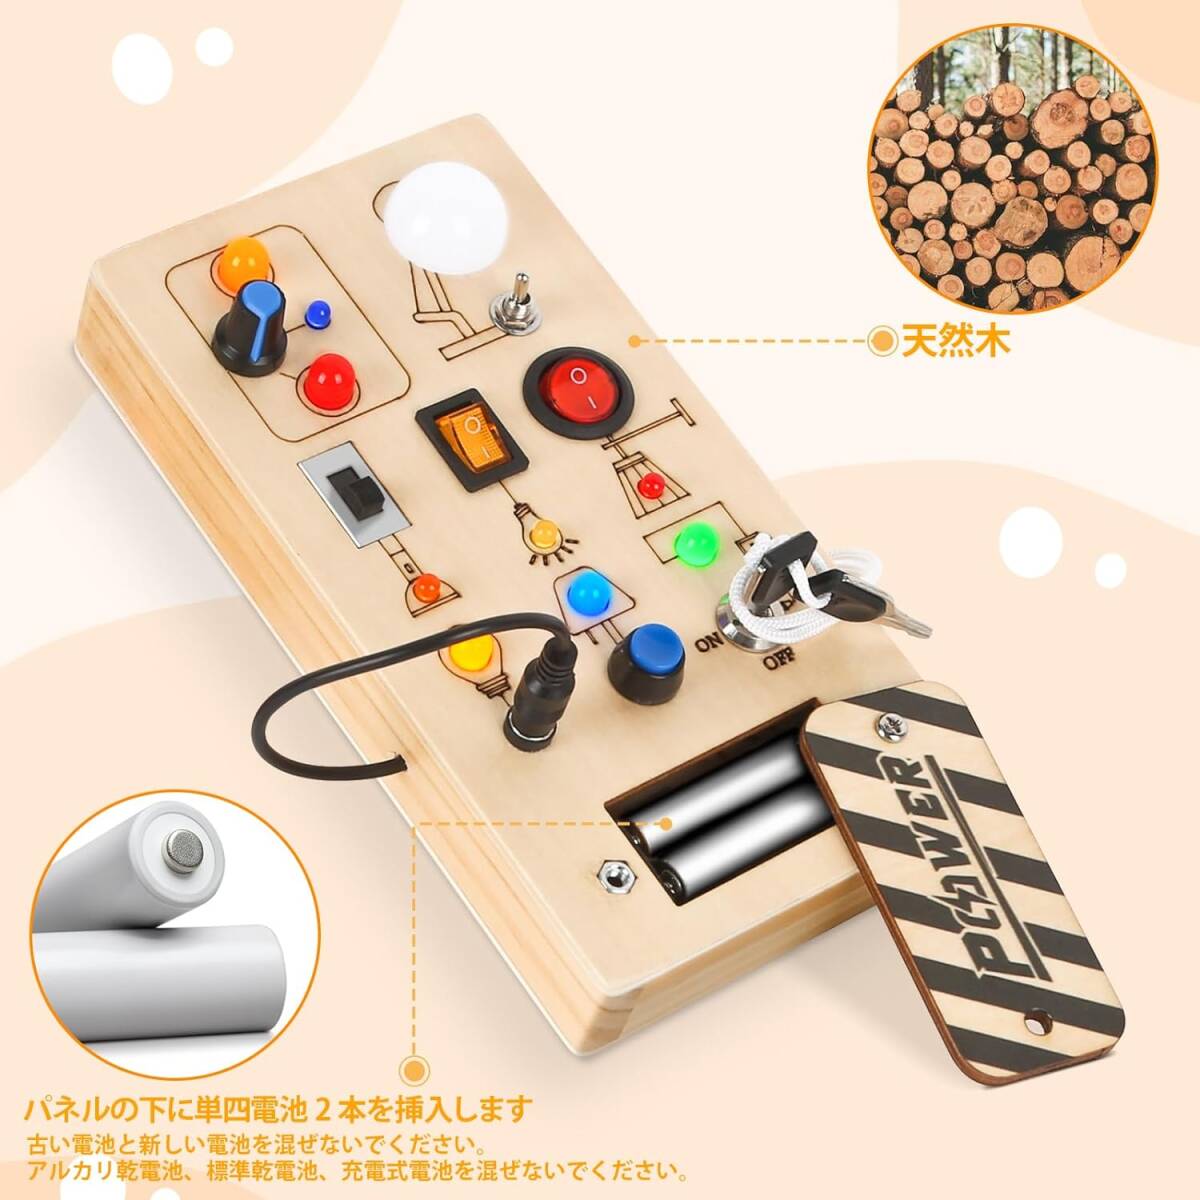  monte so-li toy biji- board intellectual training toy 1 2 3 4 -years old wooden toy early stage development finger previous intellectual training go in . celebration present birth 